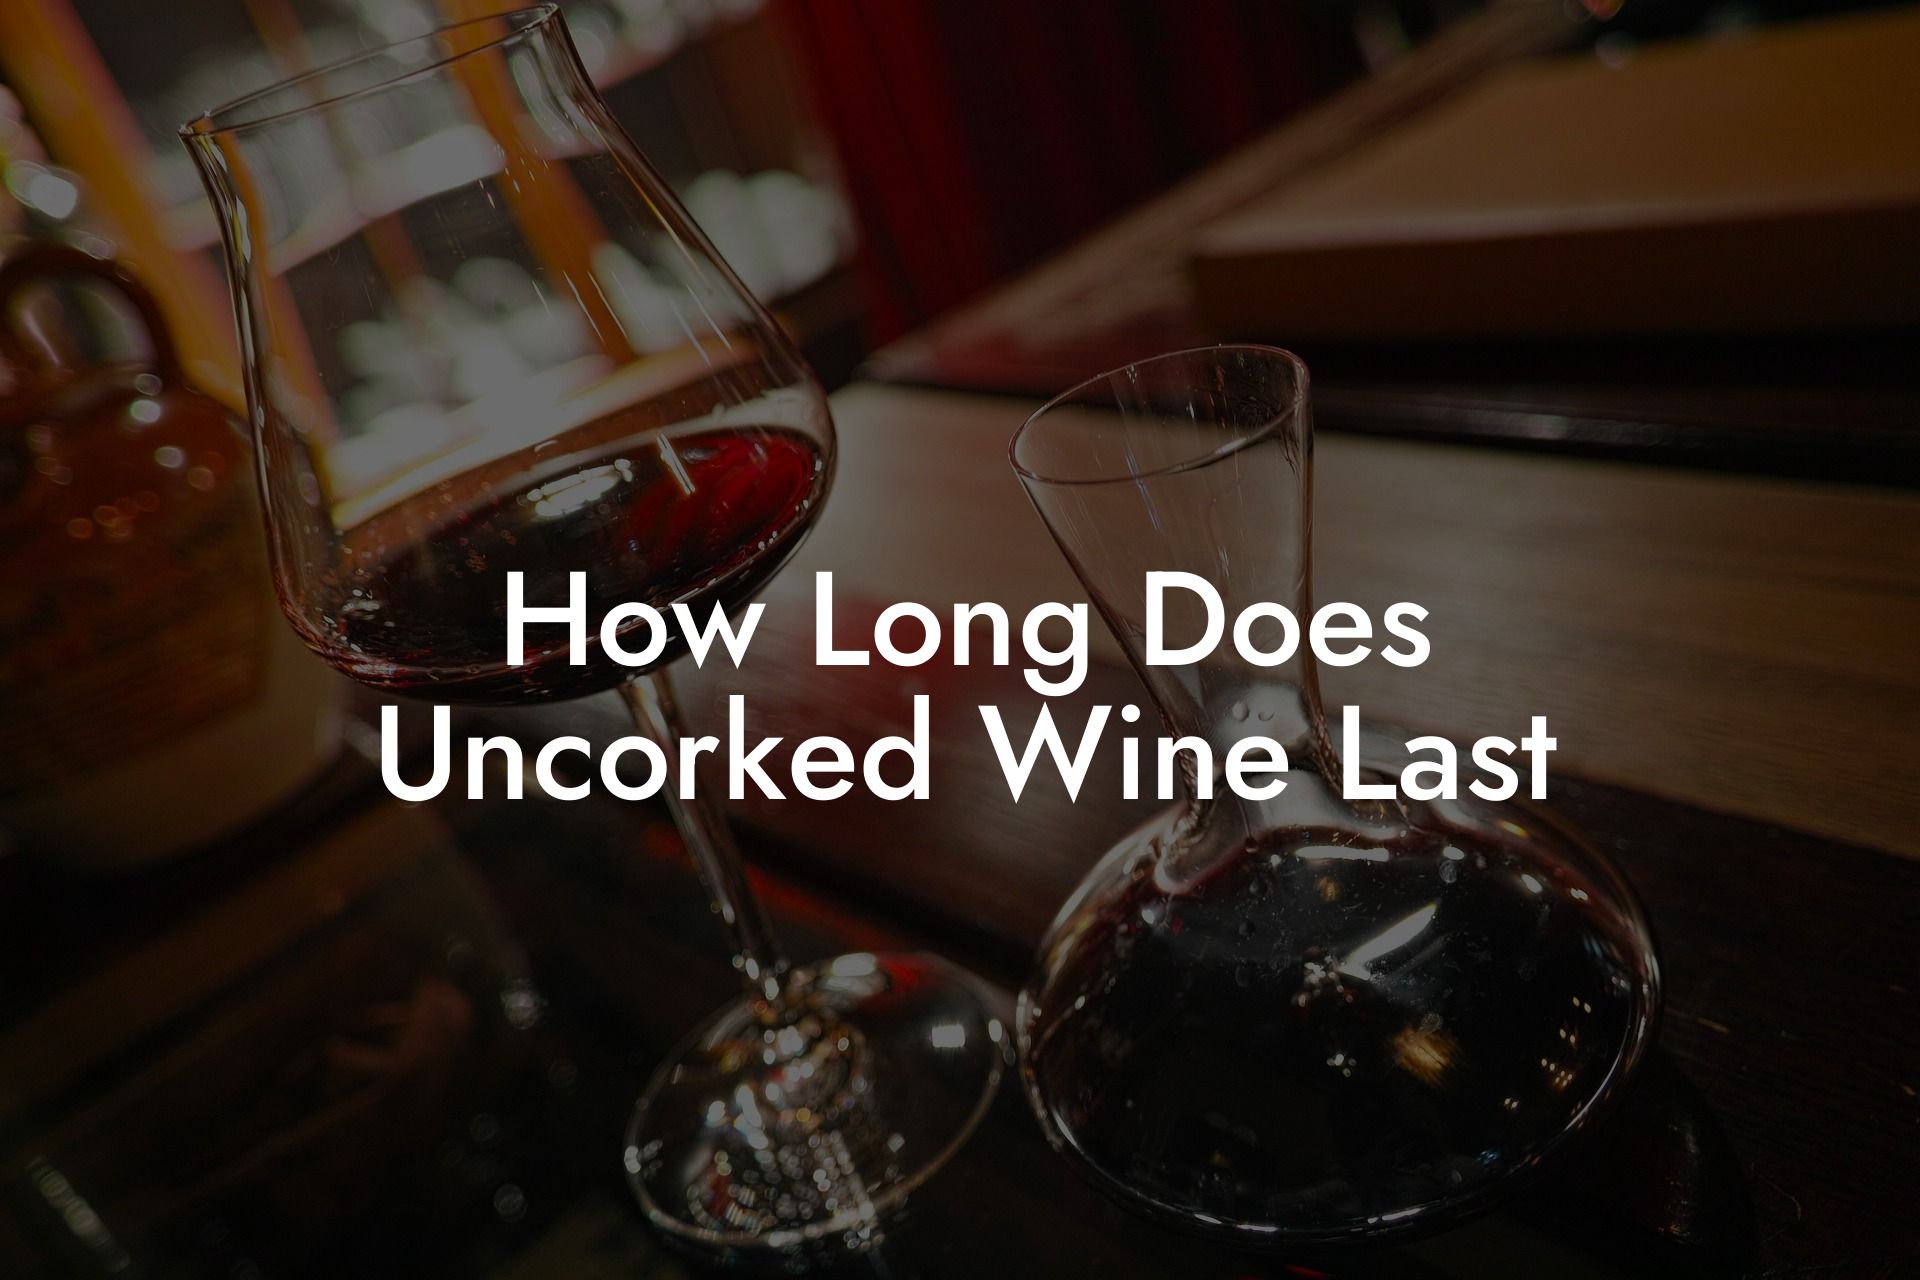 How Long Does Uncorked Wine Last